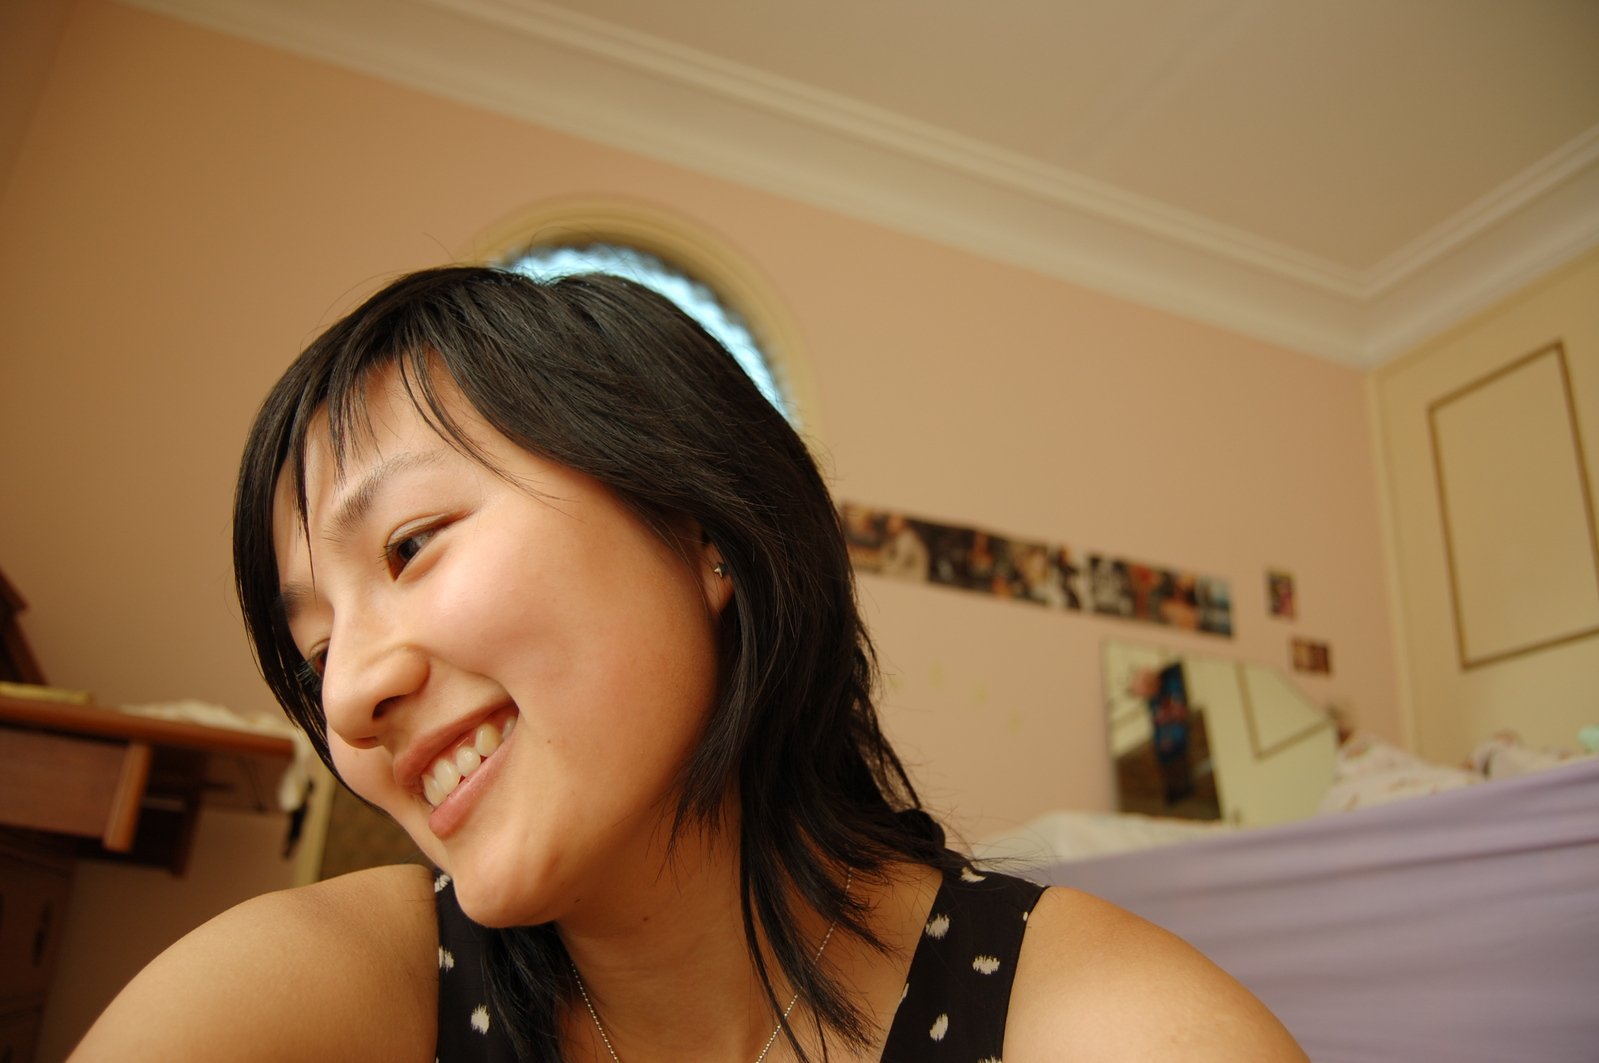 a woman with bangs smiling and laughing at the camera